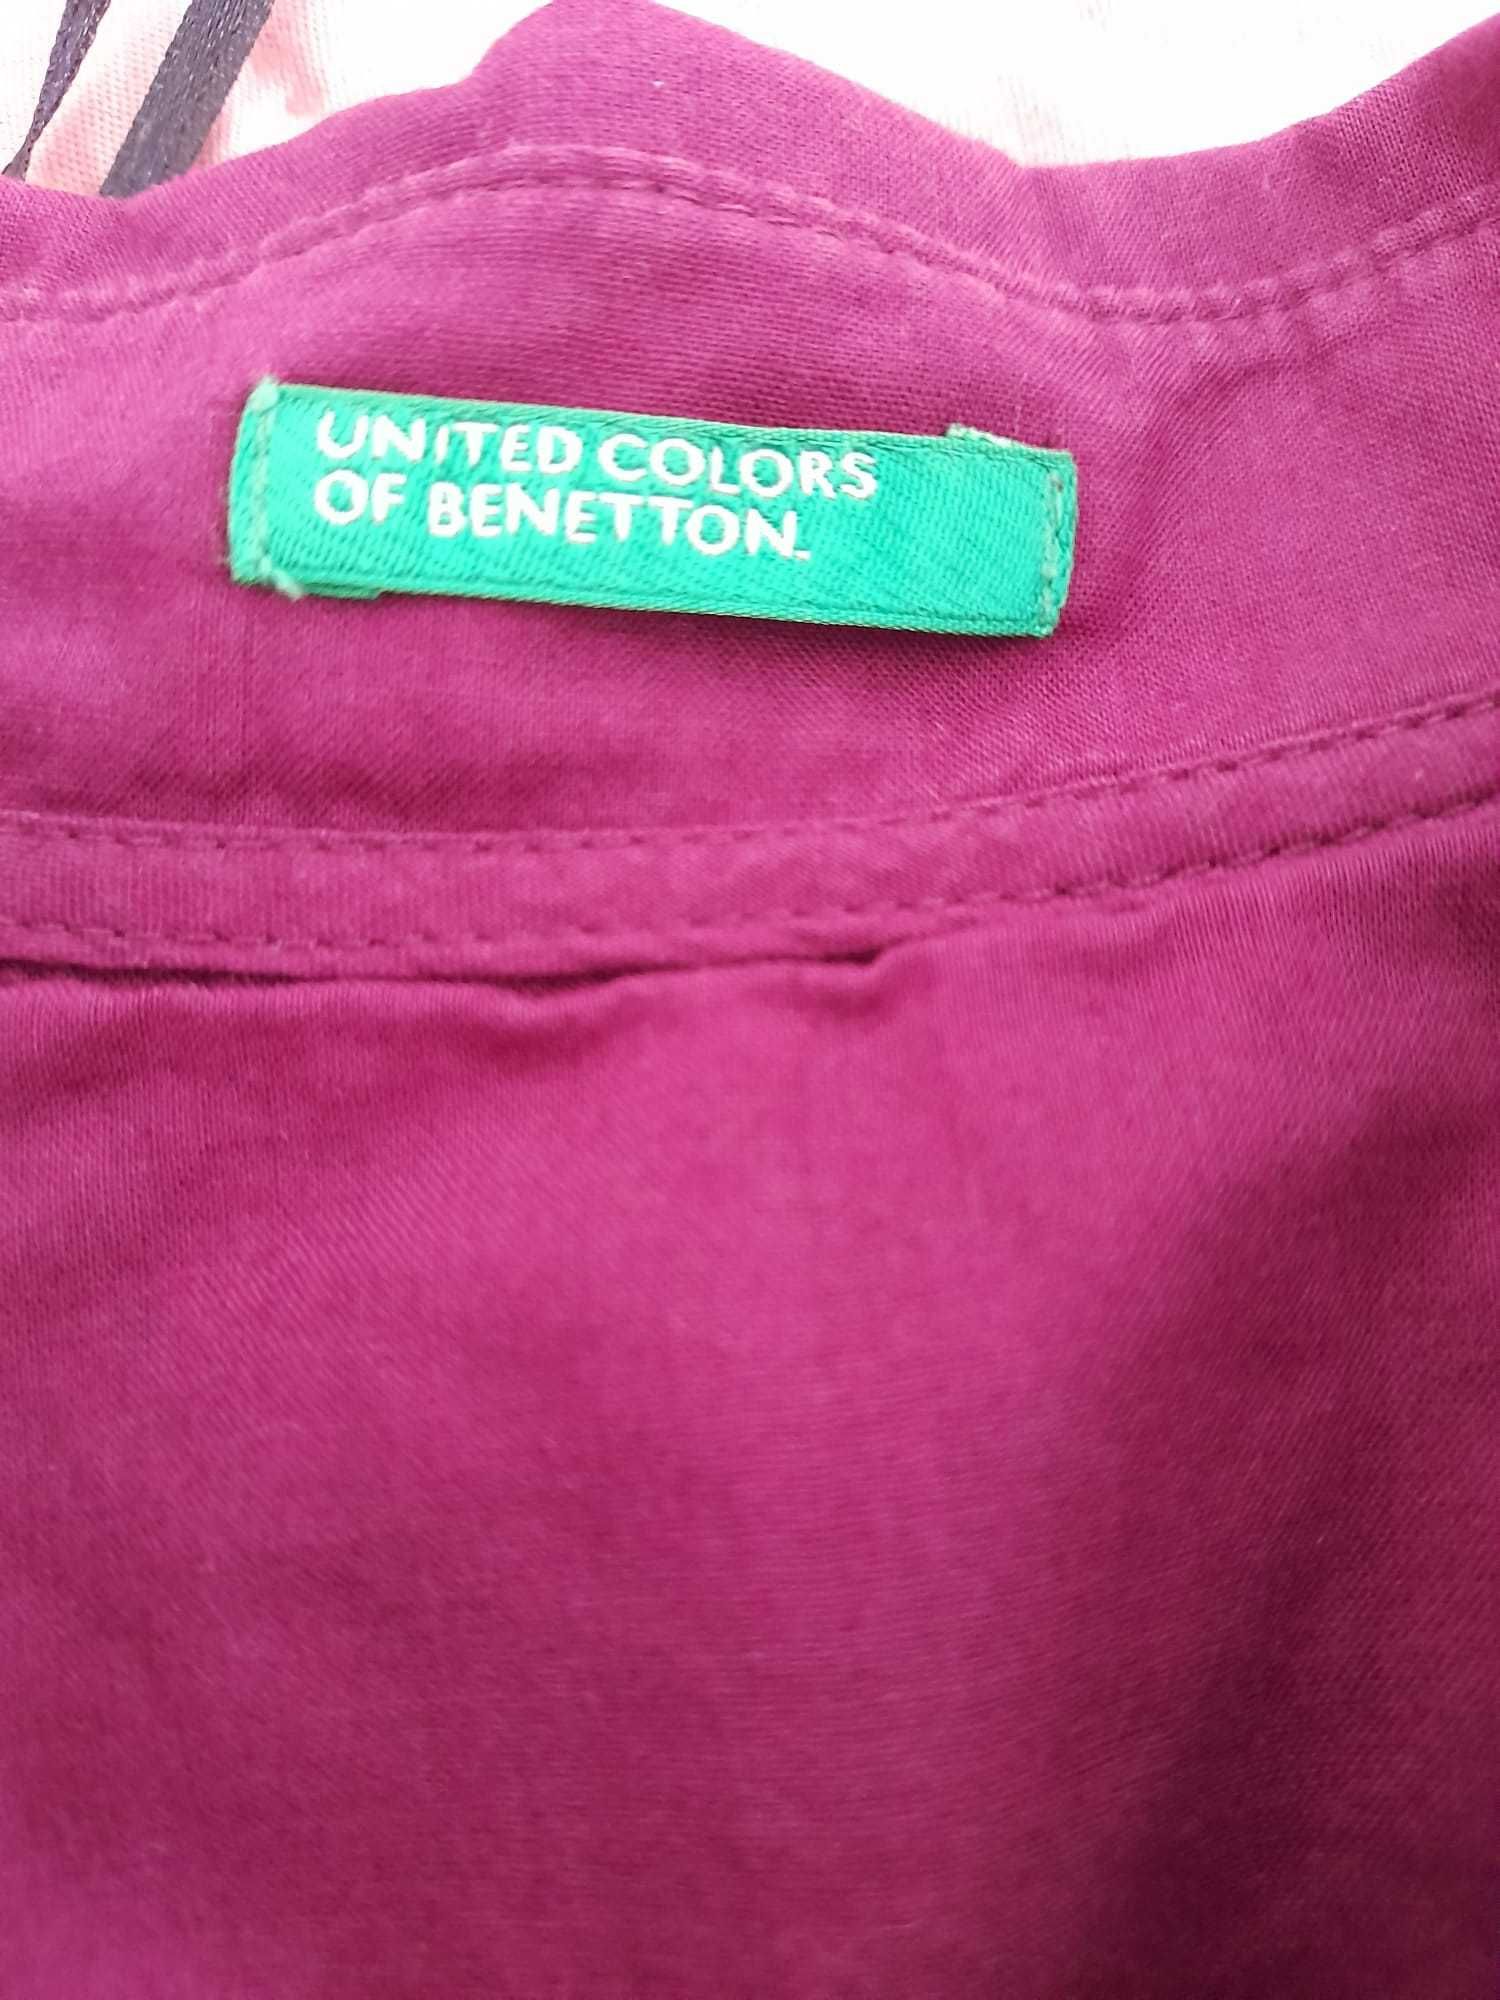 Blusa/Camisa, United Colors Of Benetton, M/38